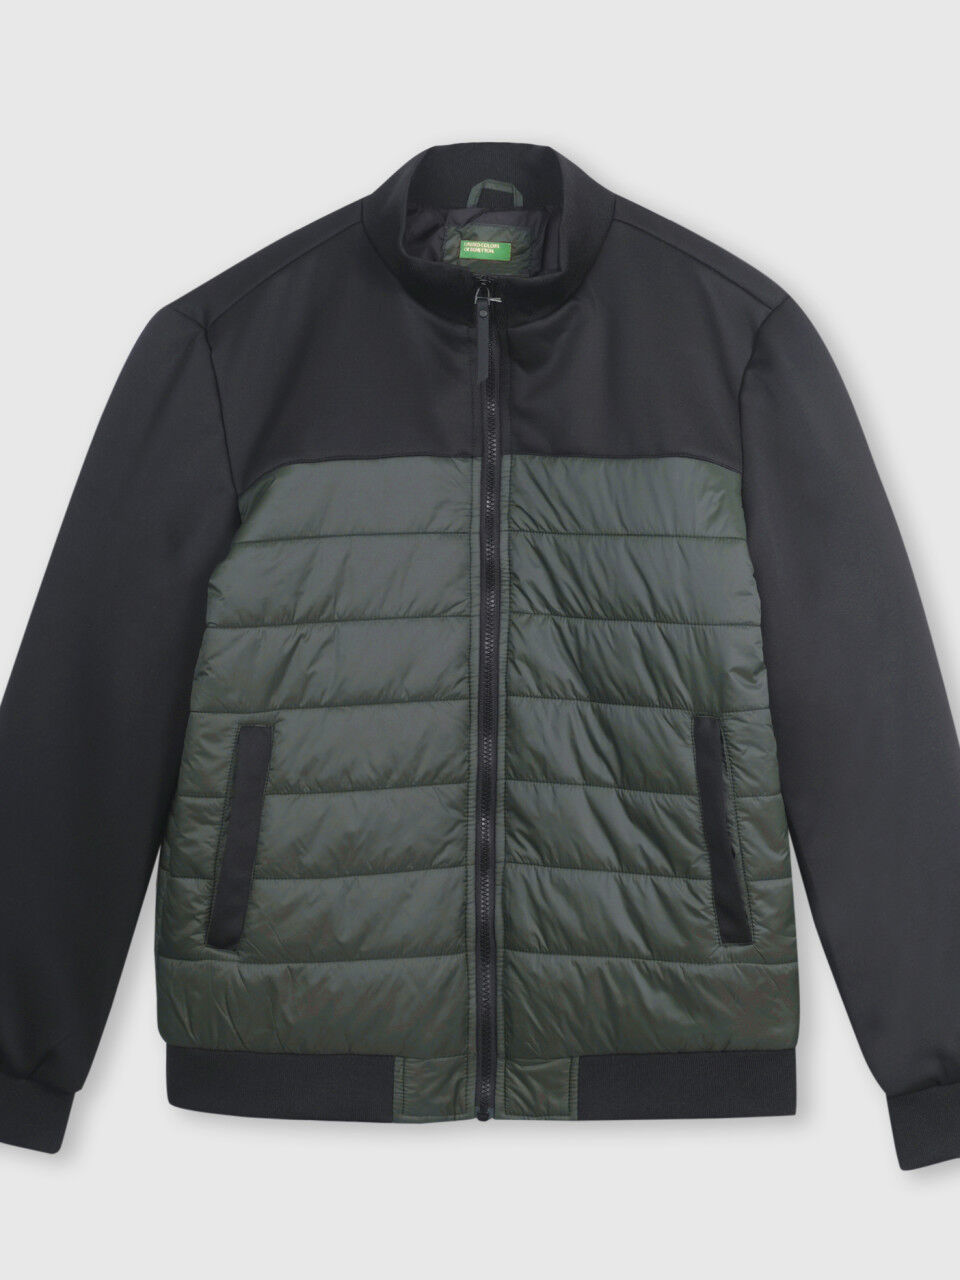 Useless development of New arrival Men's Coats and Jackets Collection 2021 | Benetton